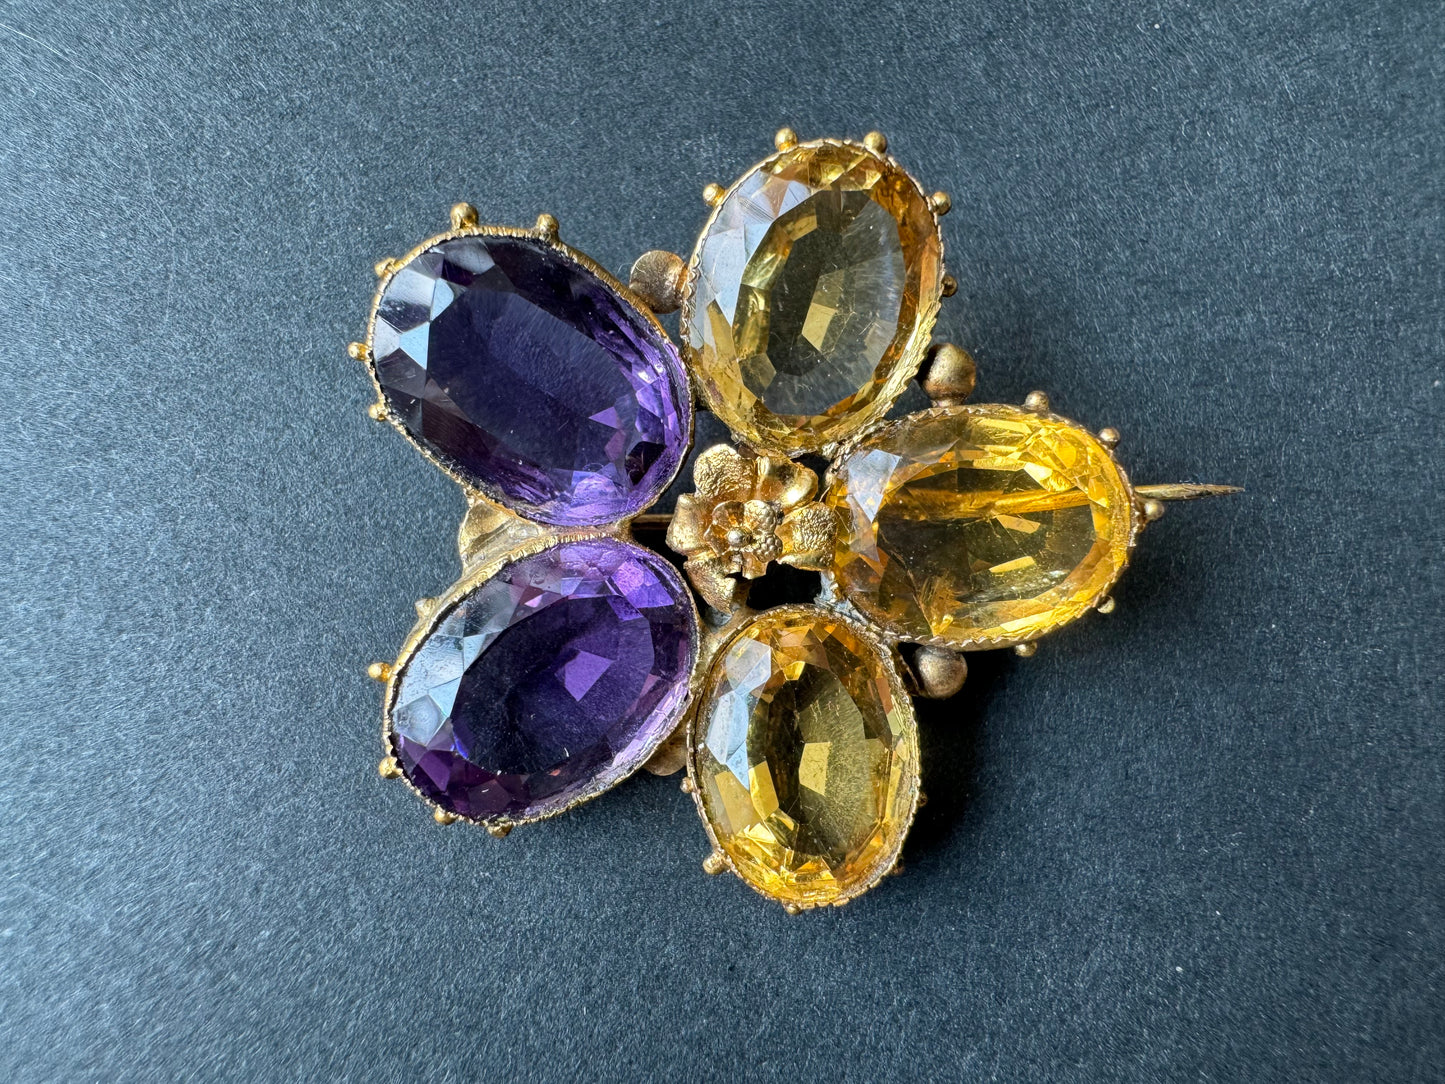 Very Early Victorian Large Amethyst and Citrine Brooch